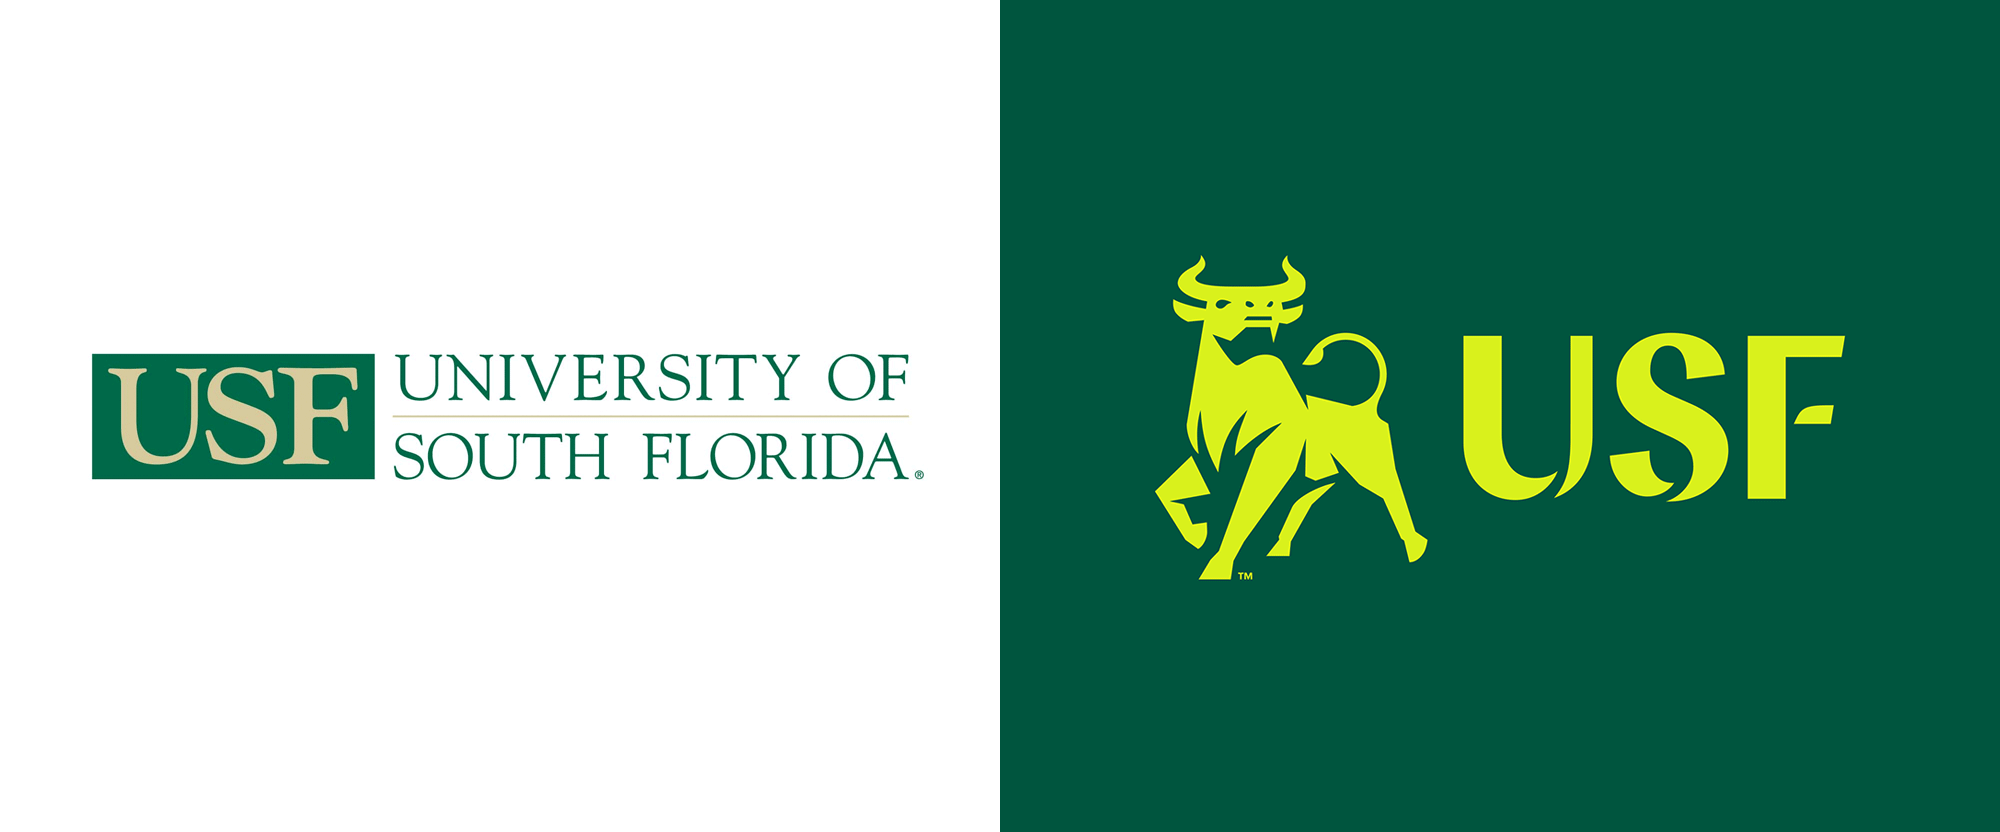 Florida Logo - Brand New: New Logo and Identity for University of South Florida by ...